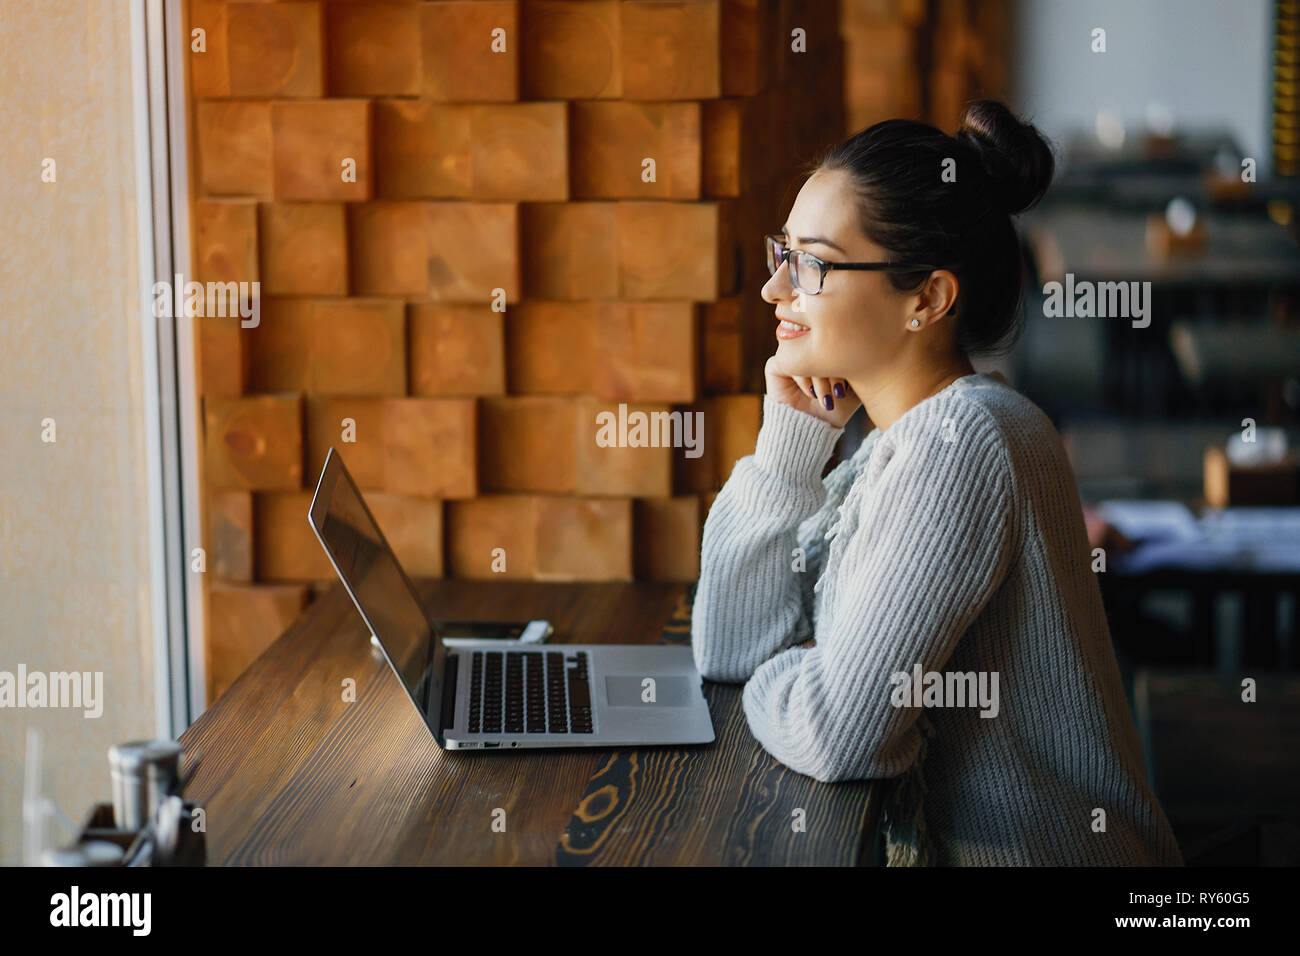 girl working on a laptop at a restaurant Stock Photo